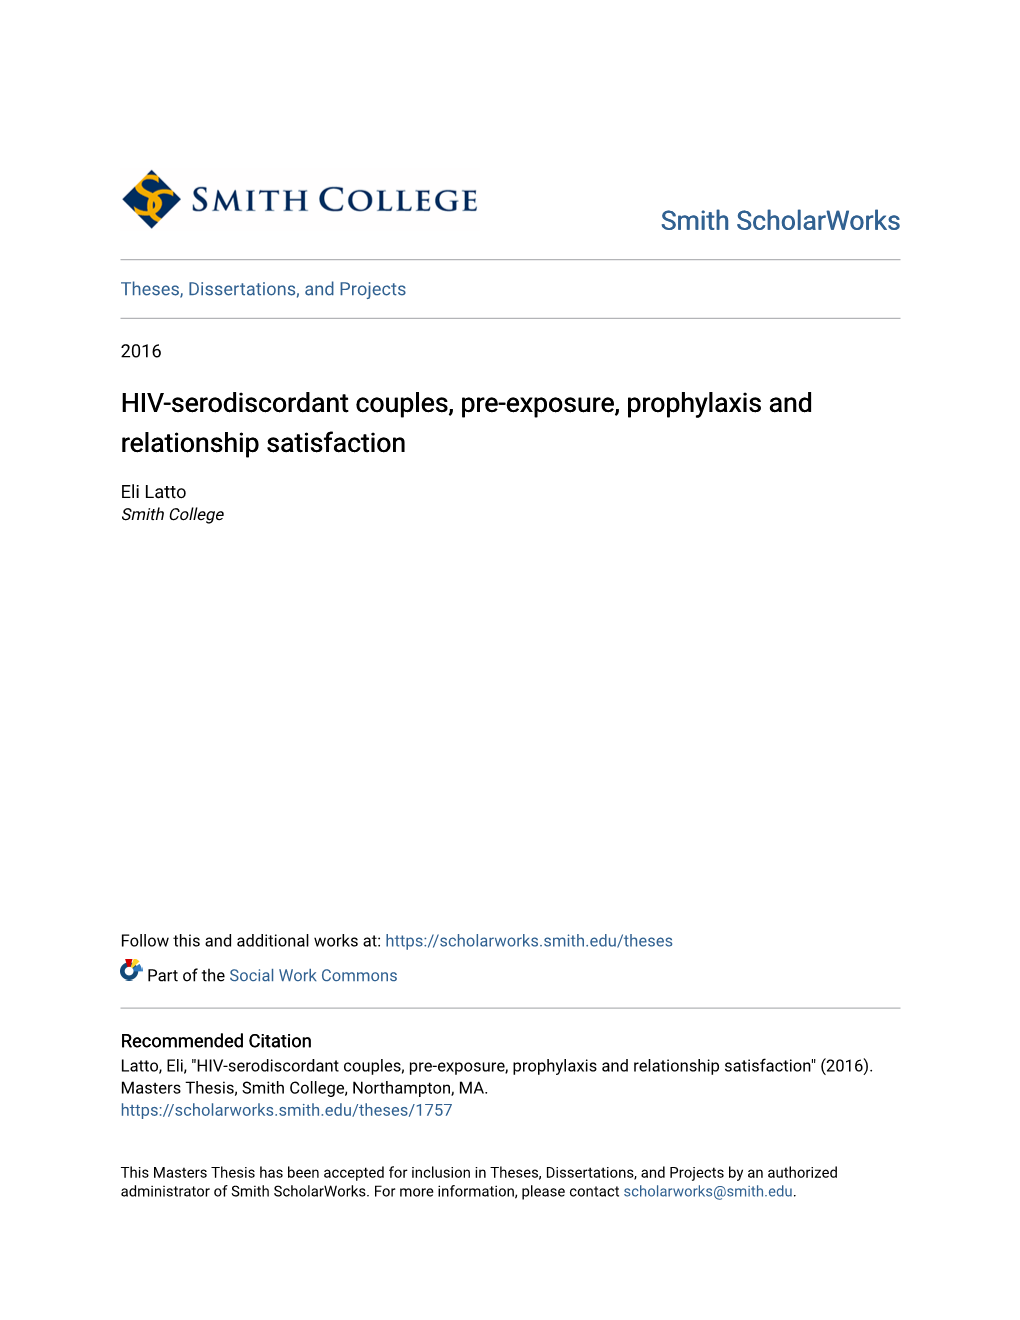 HIV-Serodiscordant Couples, Pre-Exposure, Prophylaxis and Relationship Satisfaction